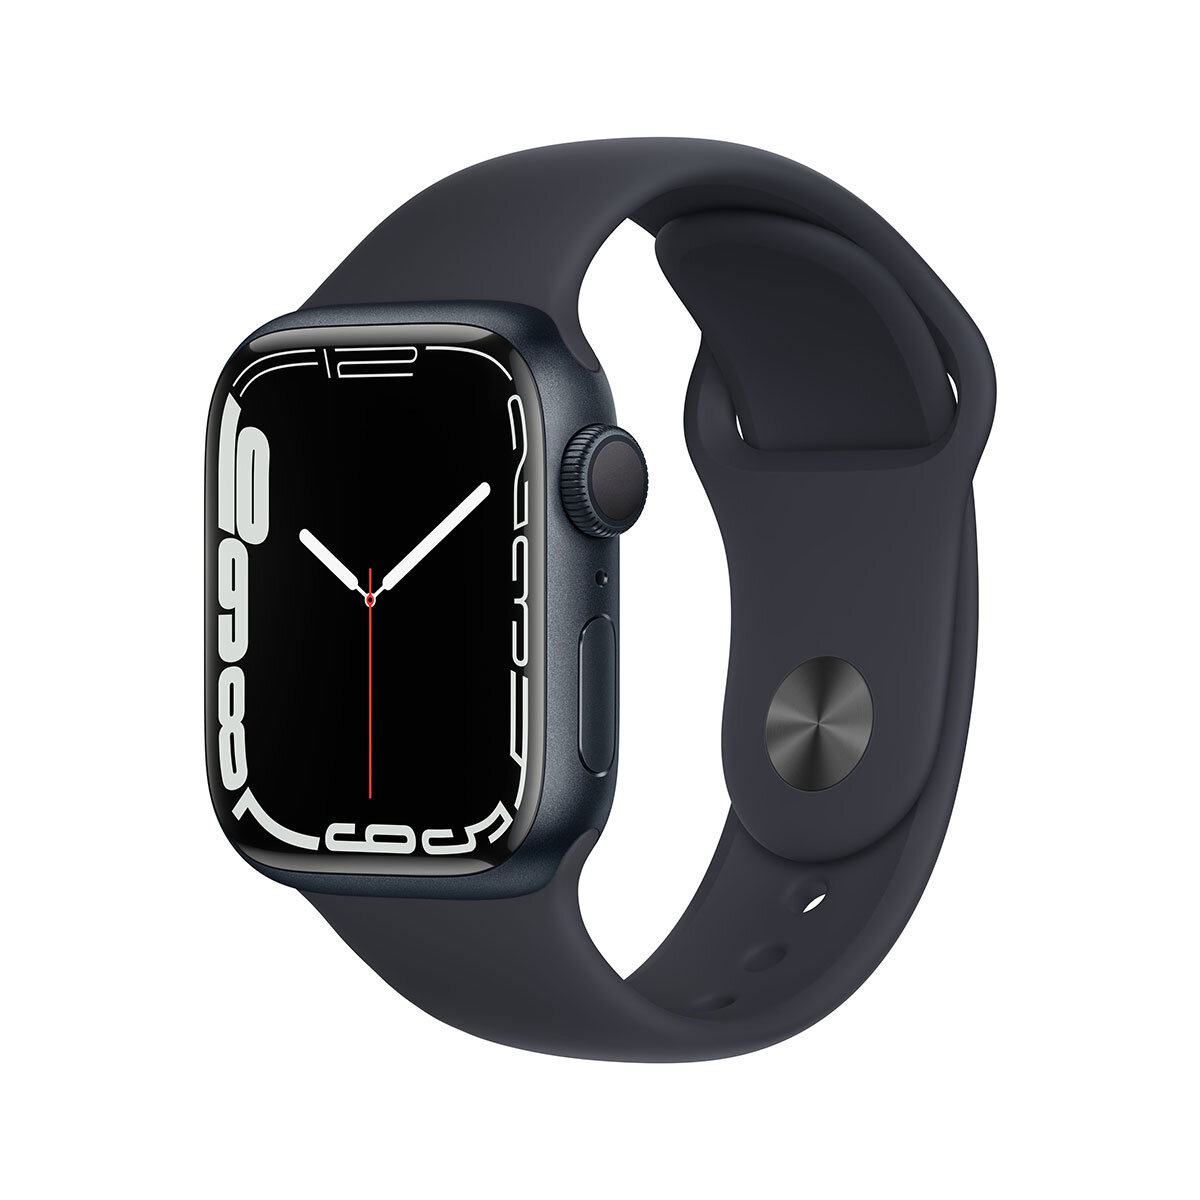 Buy Apple Watch Series 7 GPS, 41mm Aluminium Case with Sport Band at costco.co.uk